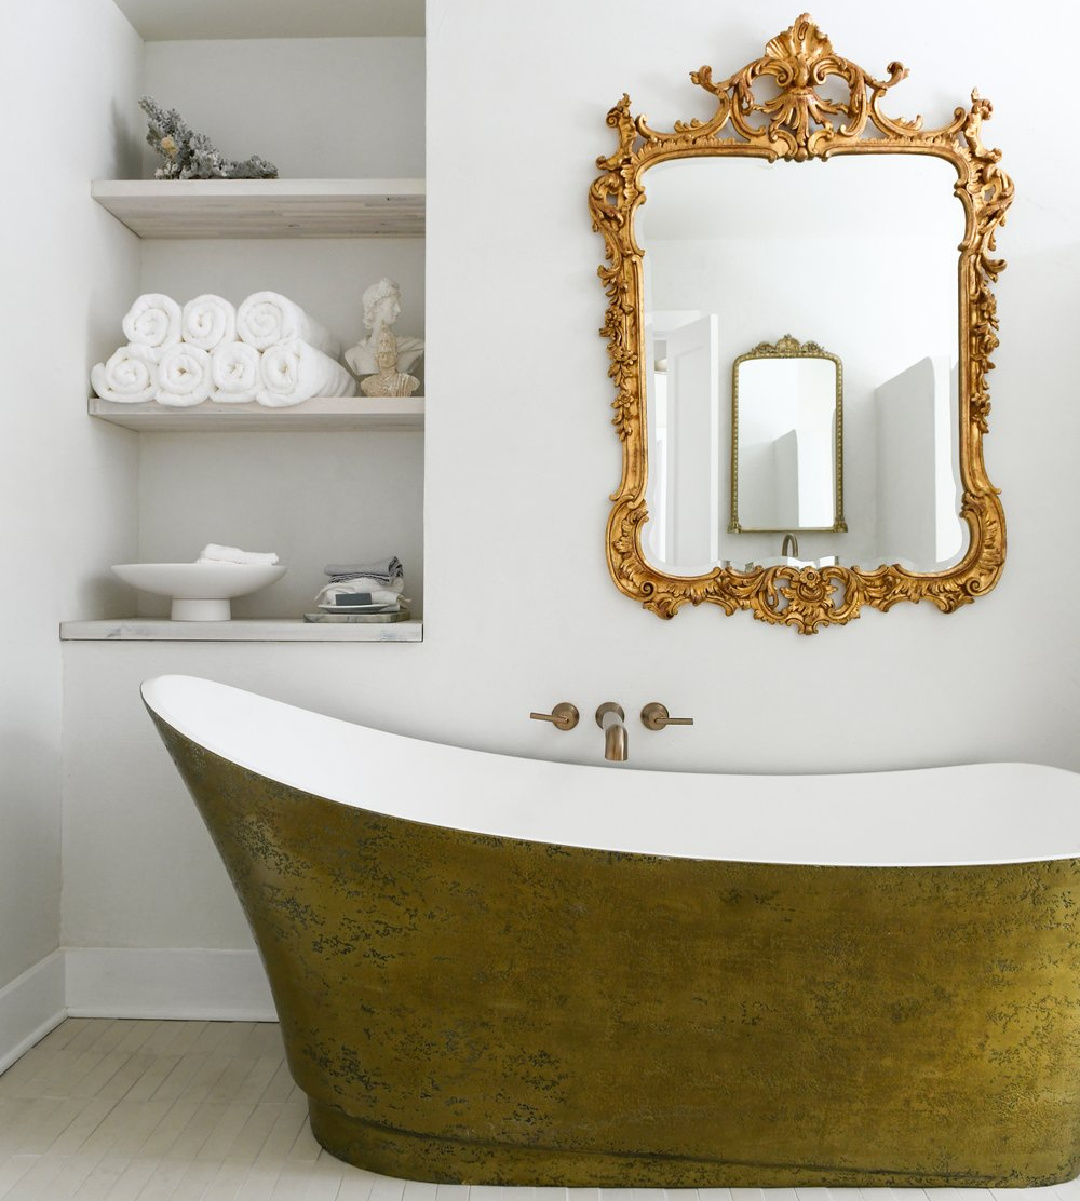 Behr Crisp Linen in a gorgeous bath with brass soaking tub and ornate French gilded mirror (Brookside project - craftsman renovation by Leanne Ford). Photo by Erin Kelly. #behrcrisplinen #leanneford #minimalluxe